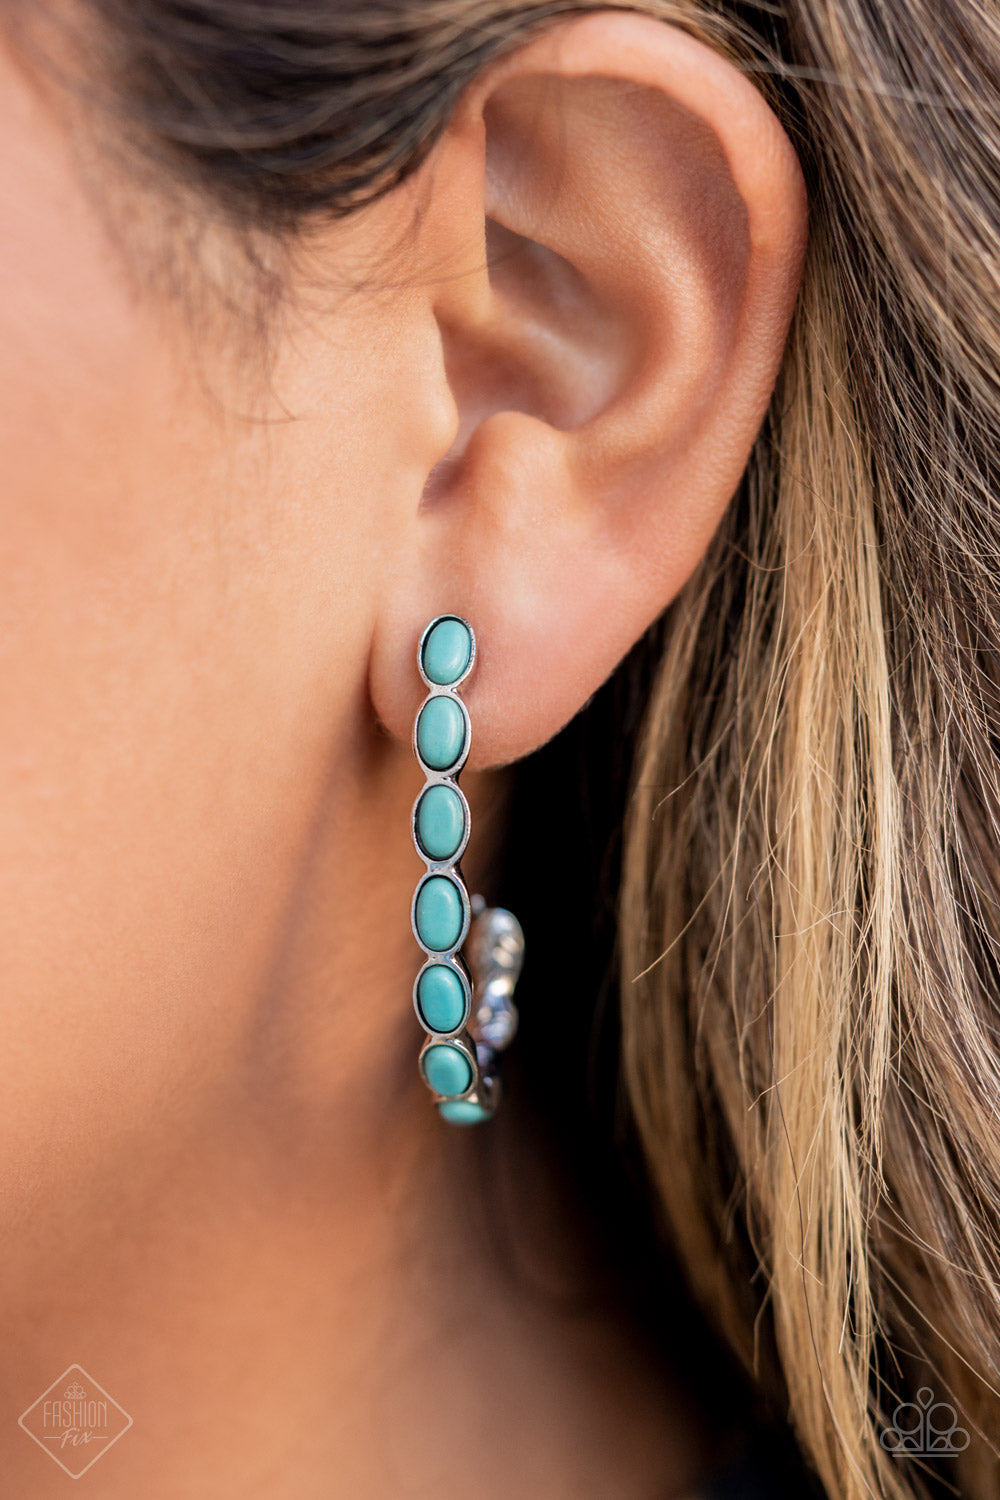 Kick Up a SANDSTORM - Blue Hoop Paparazzi Accessories $5 Earring in Turquoise Blue Stone 